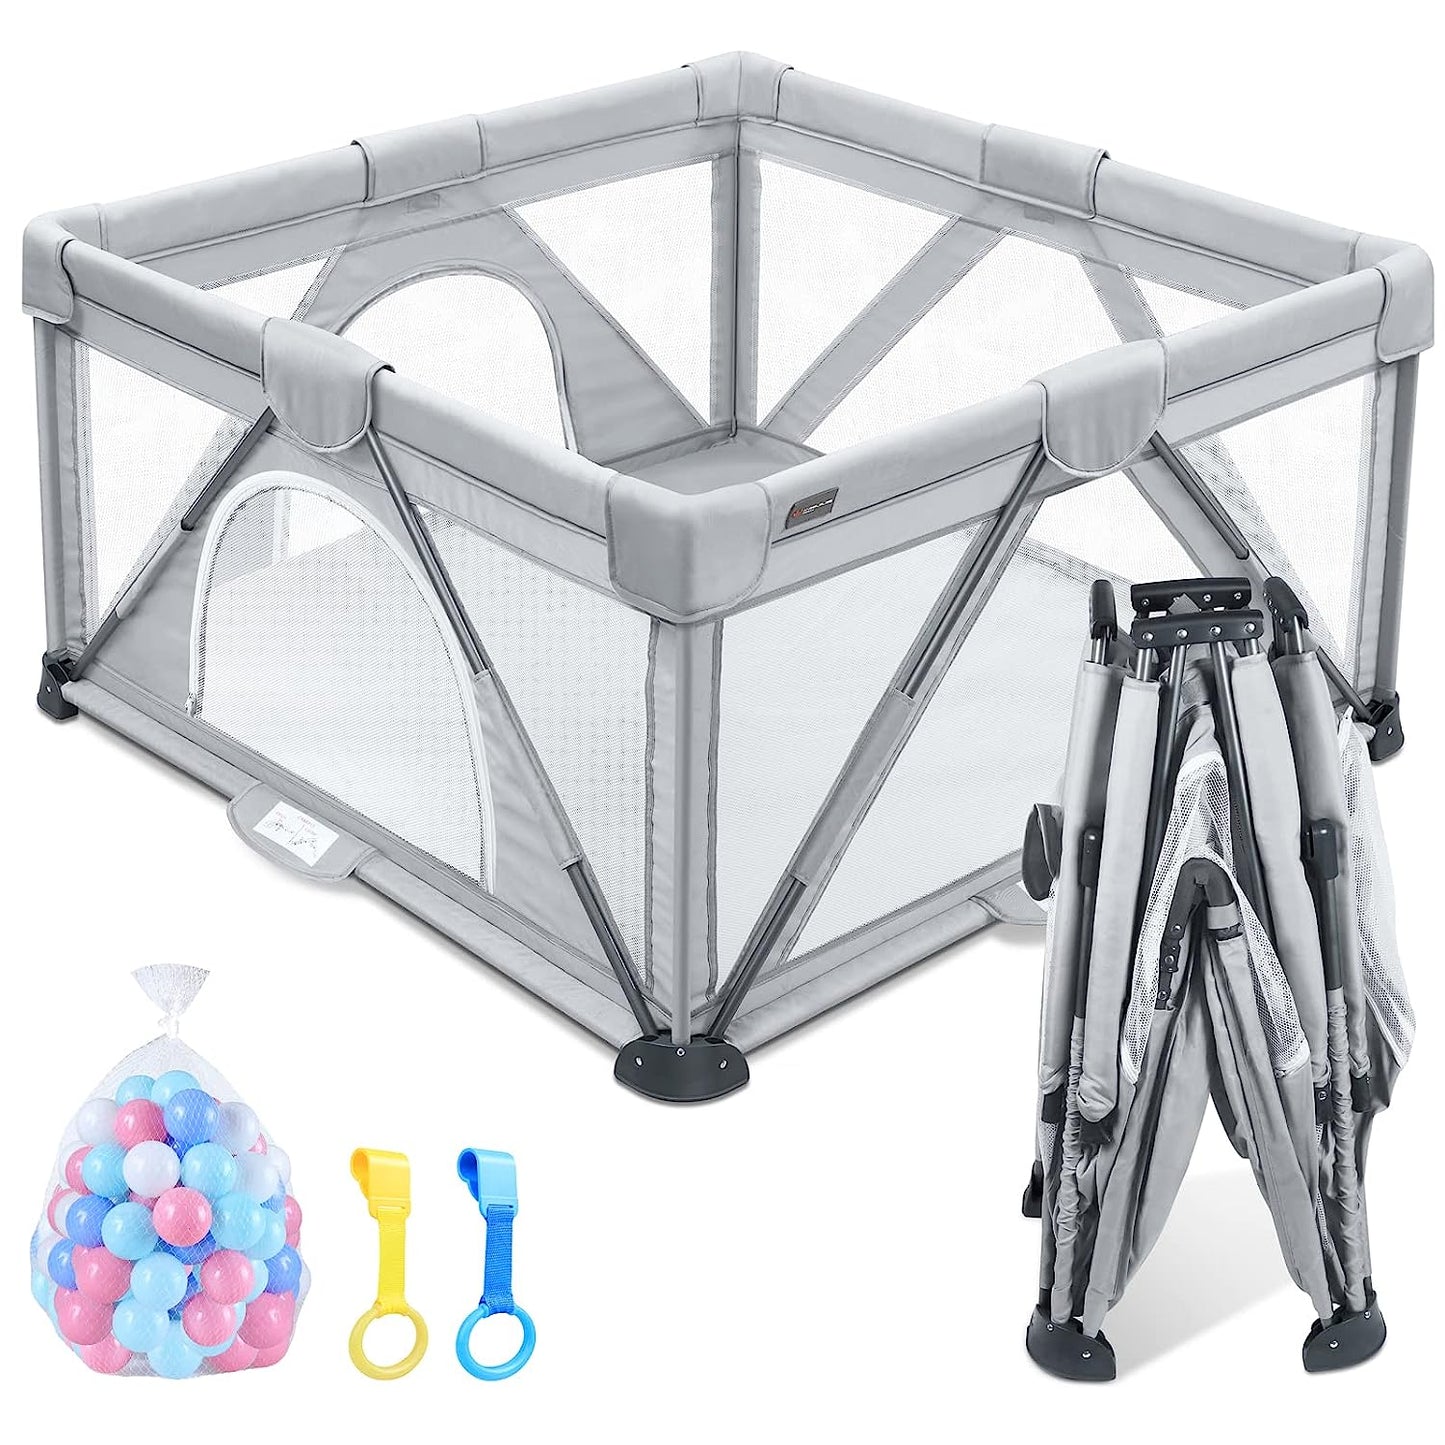 Gray visible breathable mesh baby playpen with 2 Handlers + 50 balls